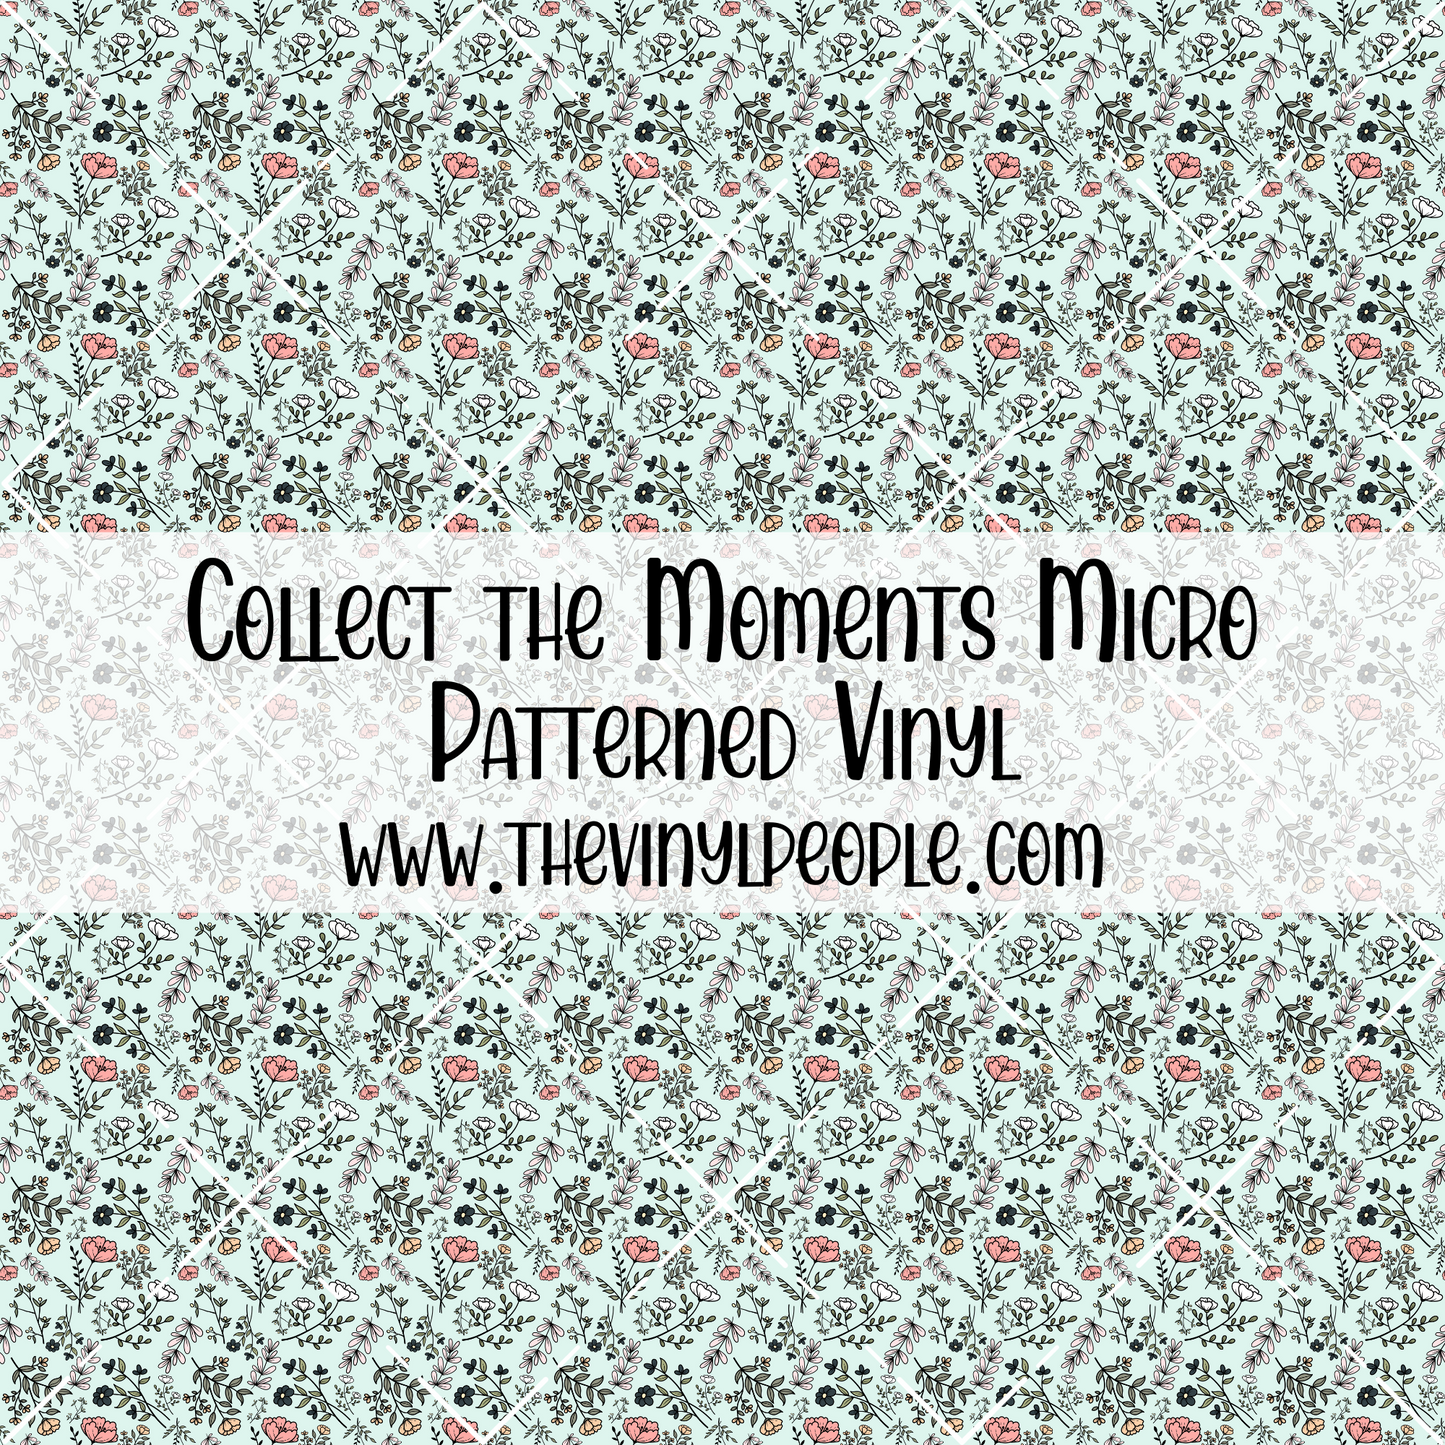 Collect the Moments Patterned Vinyl